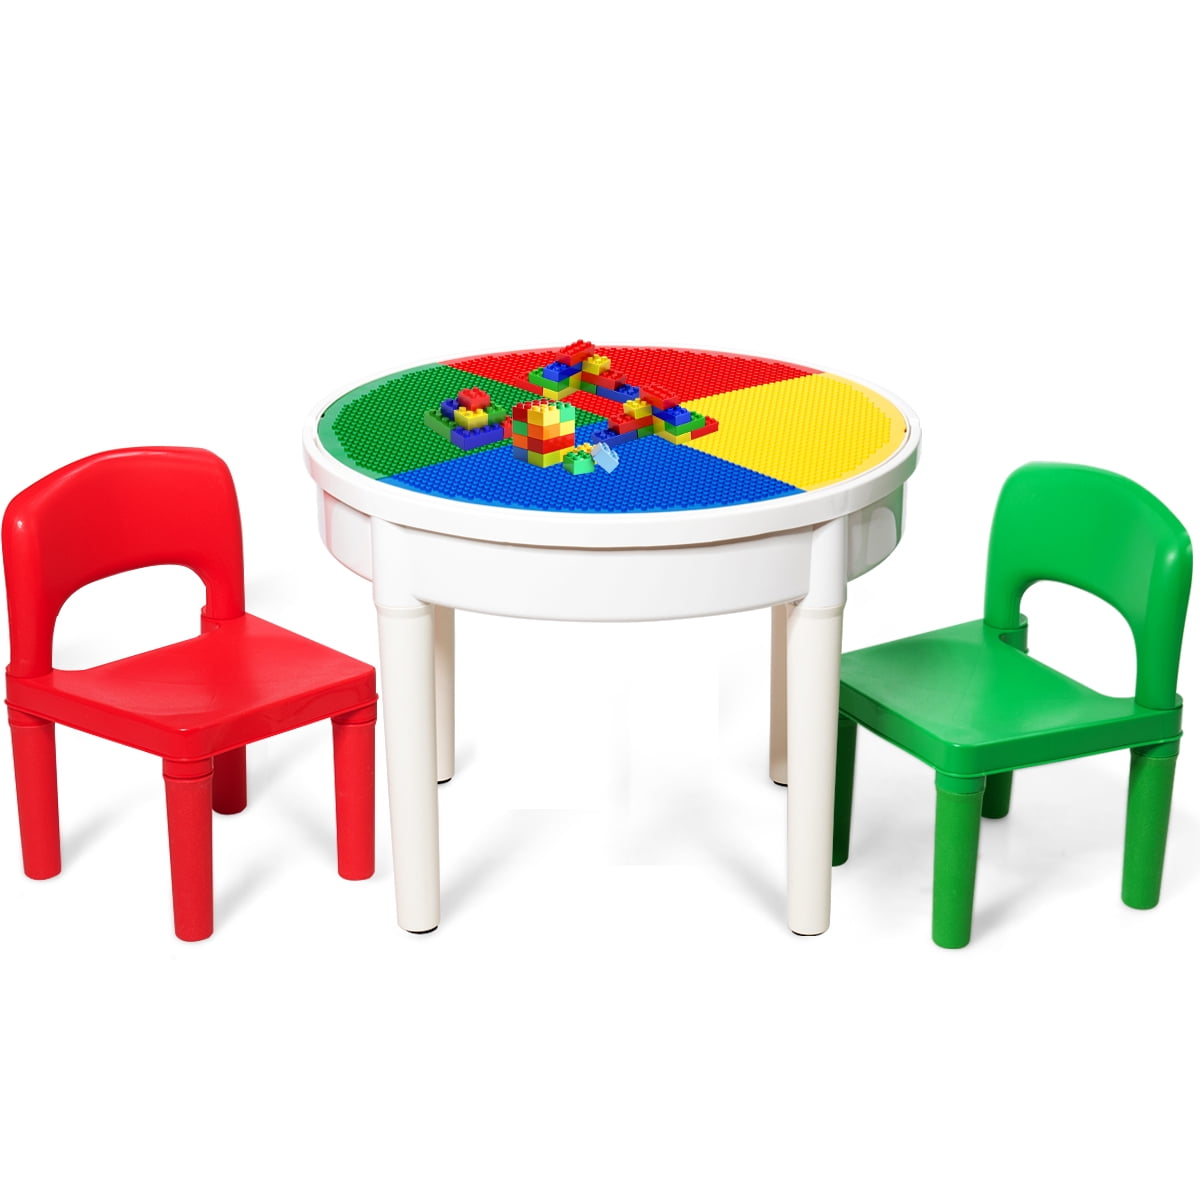 LHONE Multi-Function Activity Multi-Function Wooden Activity Table and Chair Set for Kids Toddler 